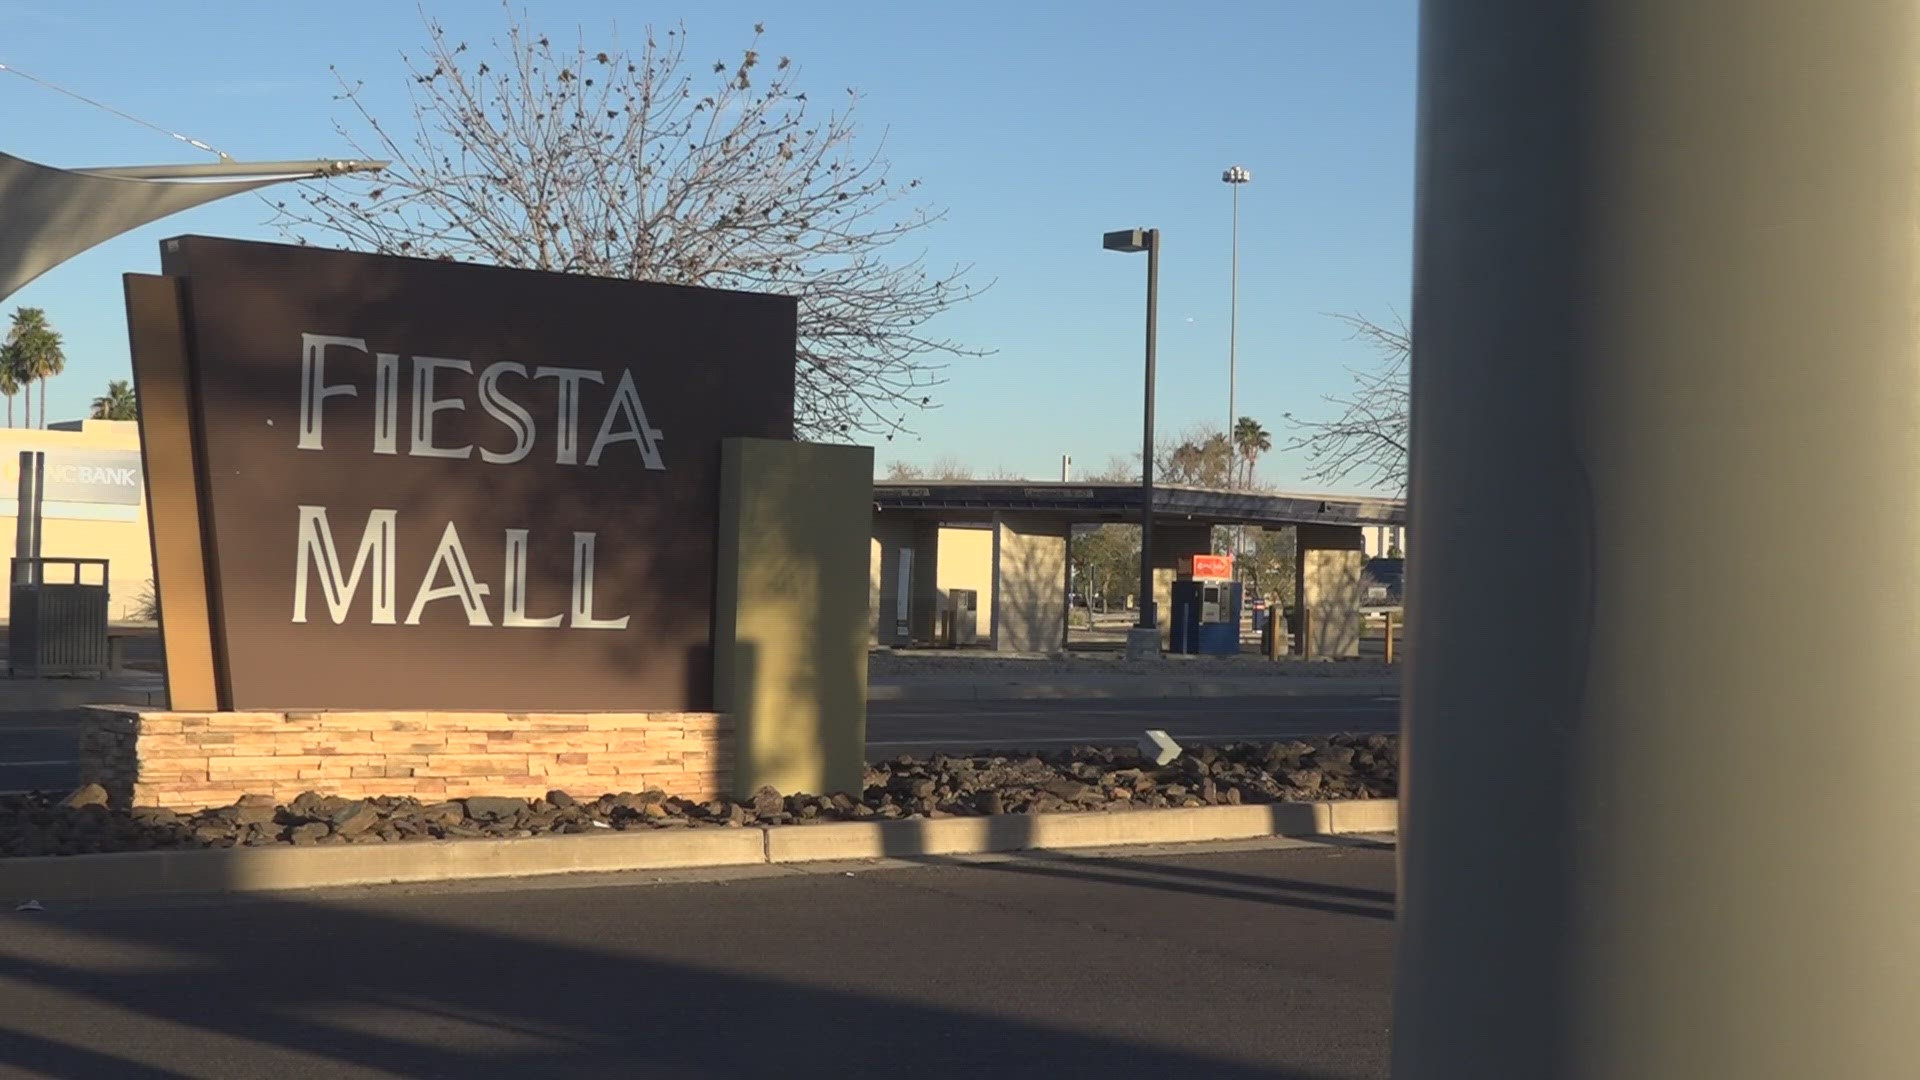 The East Valley mall has been empty for years. Developers submitted plans earlier this year to build new homes, apartments, and retail on the property.